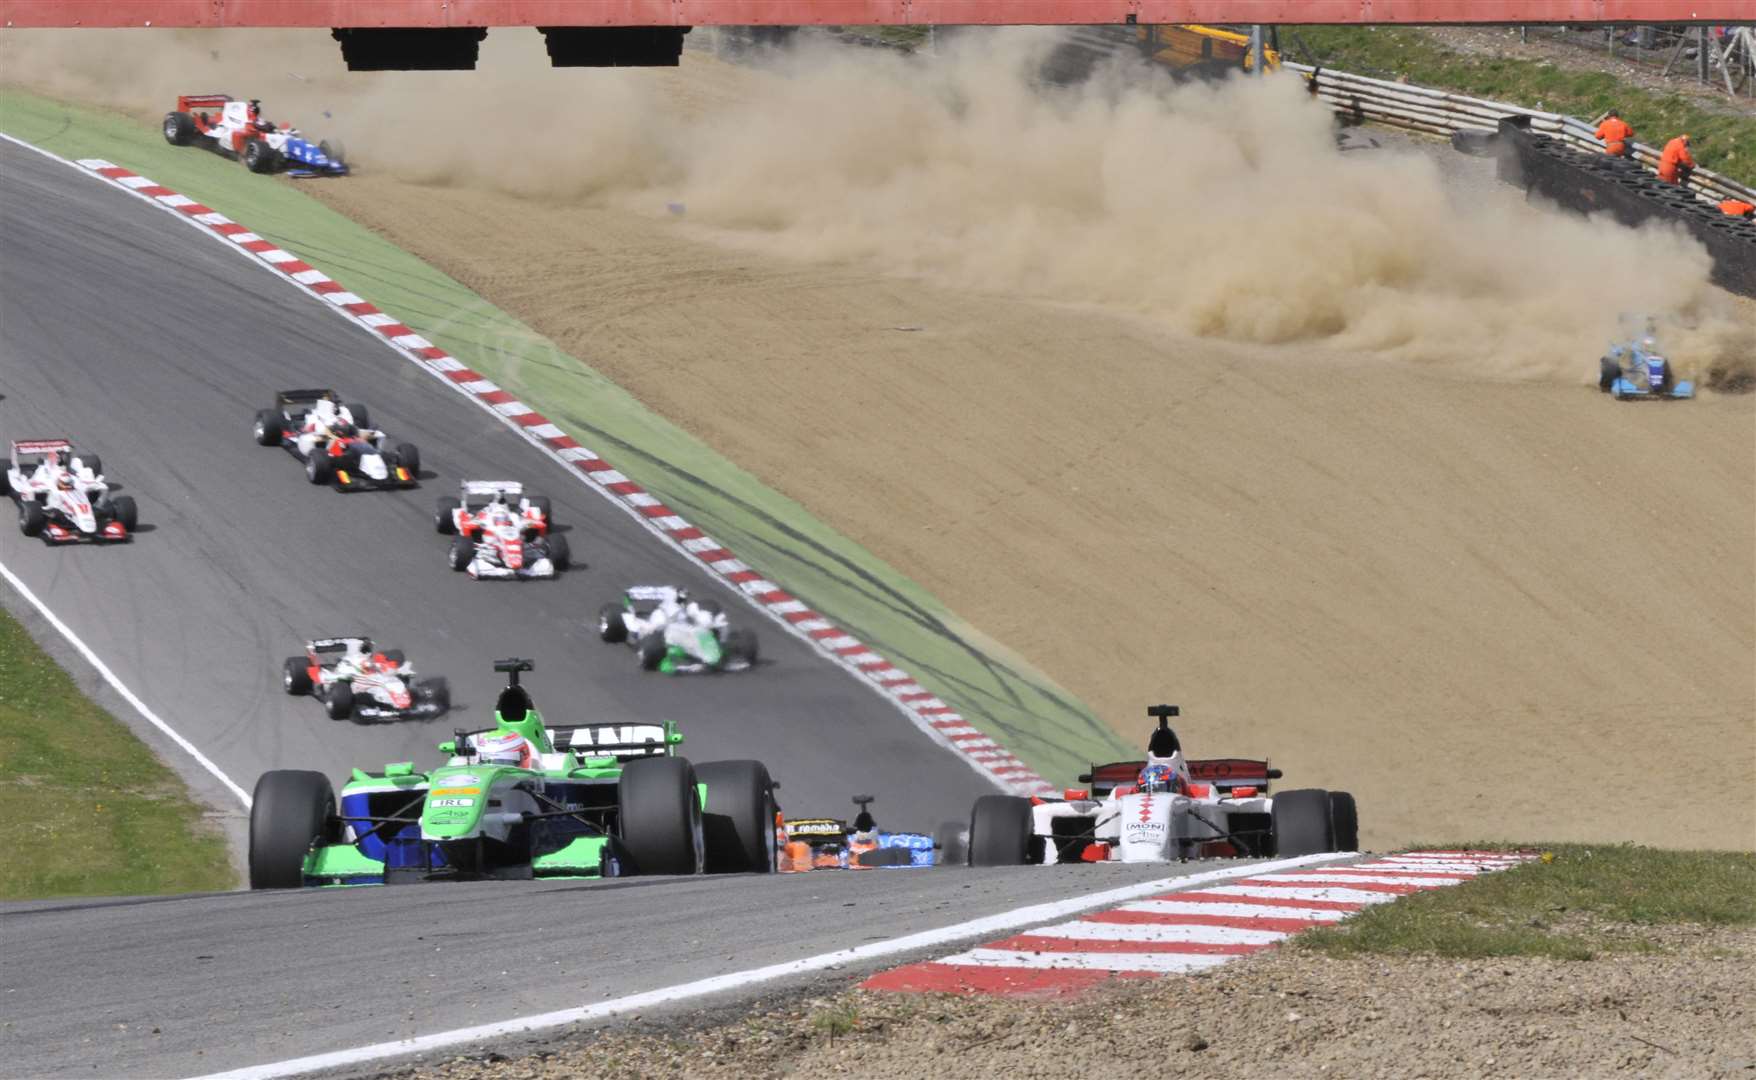 Ireland's Adam Carroll leads the A1GP feature race at Brands Hatch in May 2009, while India's Narain Karthikeyan hits the gravel at Paddock Hill Bend in the background. Picture: Andy Payton